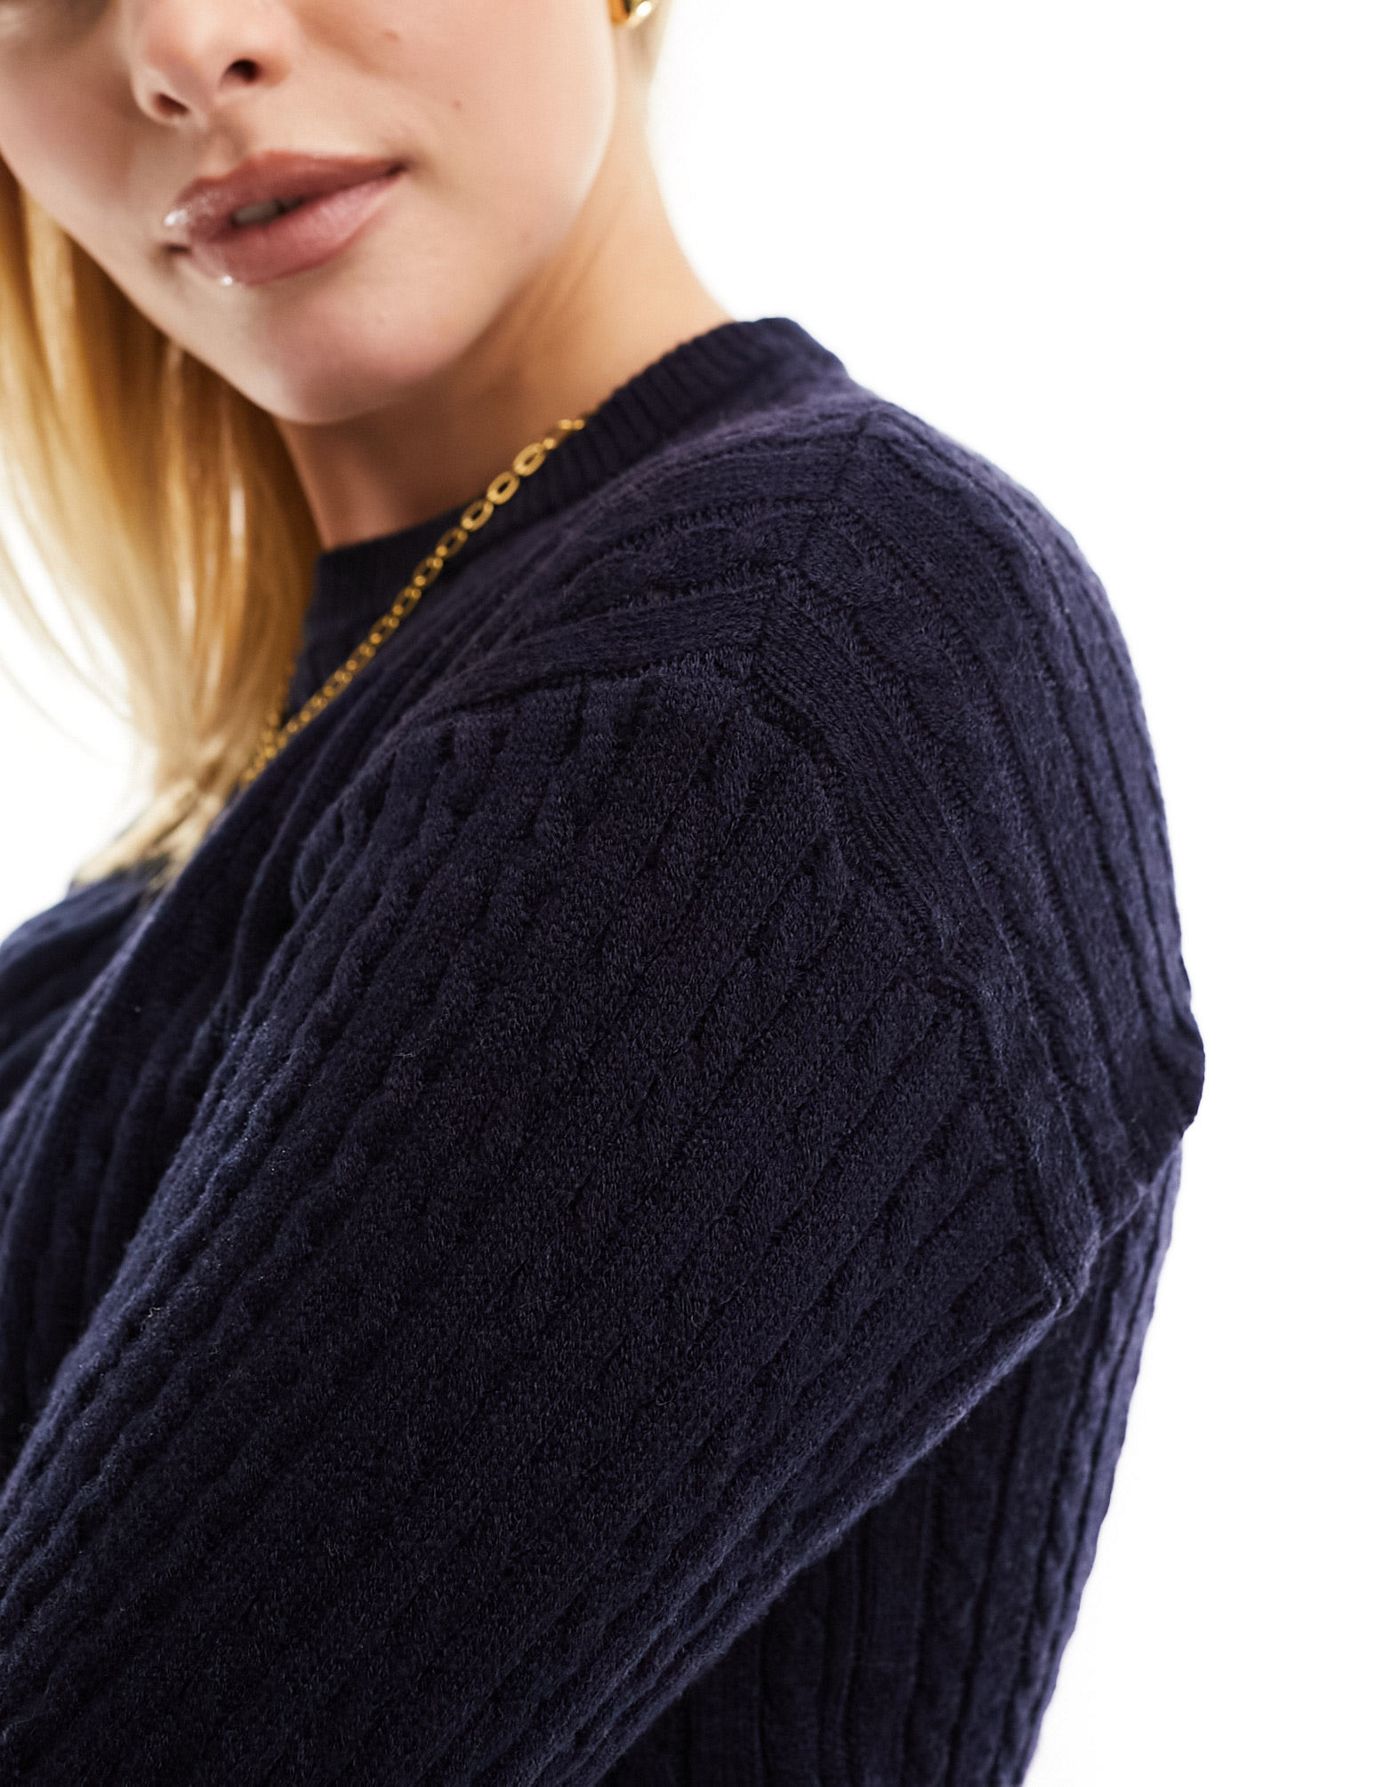 Cotton:On Everfine Cable Crew Neck Pullover jumper in blue